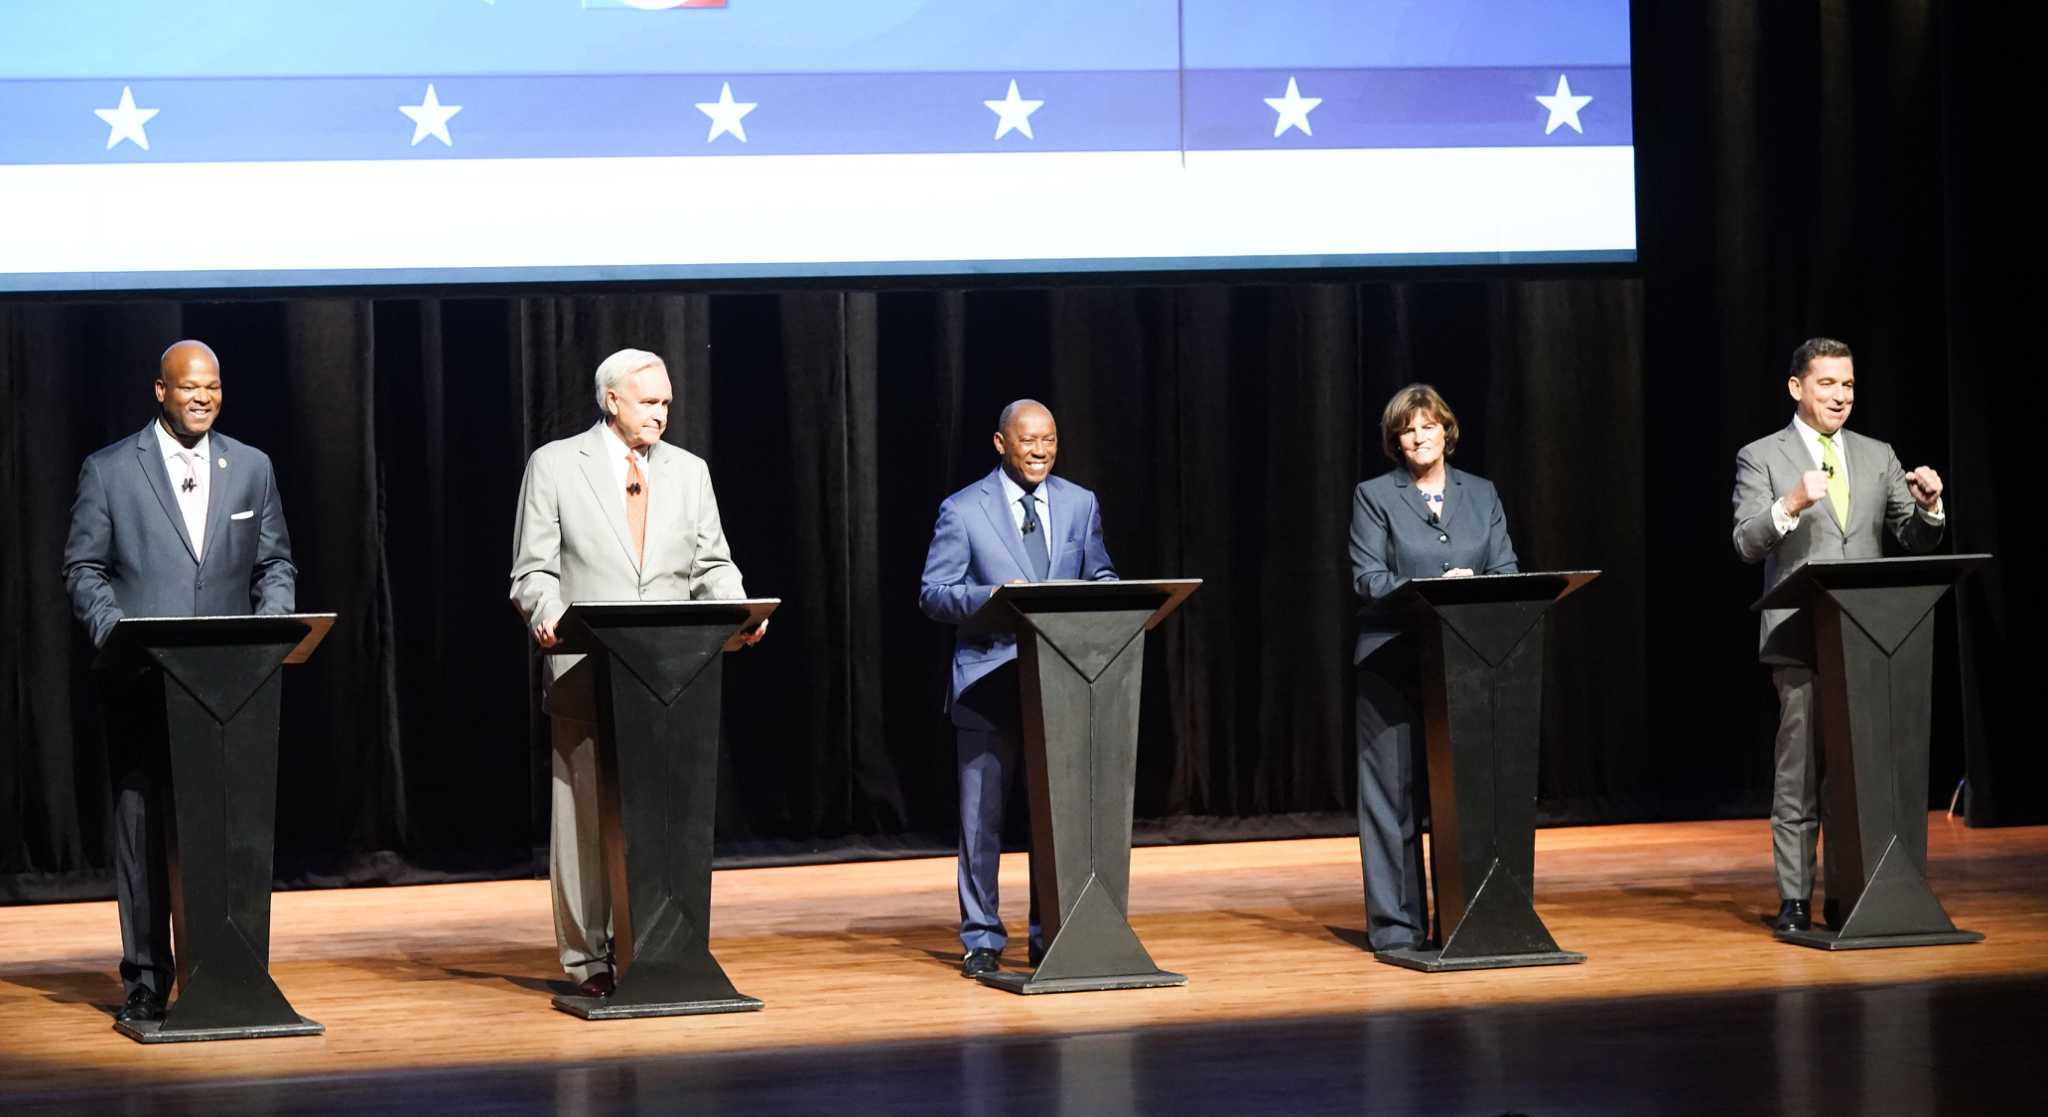 Houston mayoral candidates to appear in Friday debate